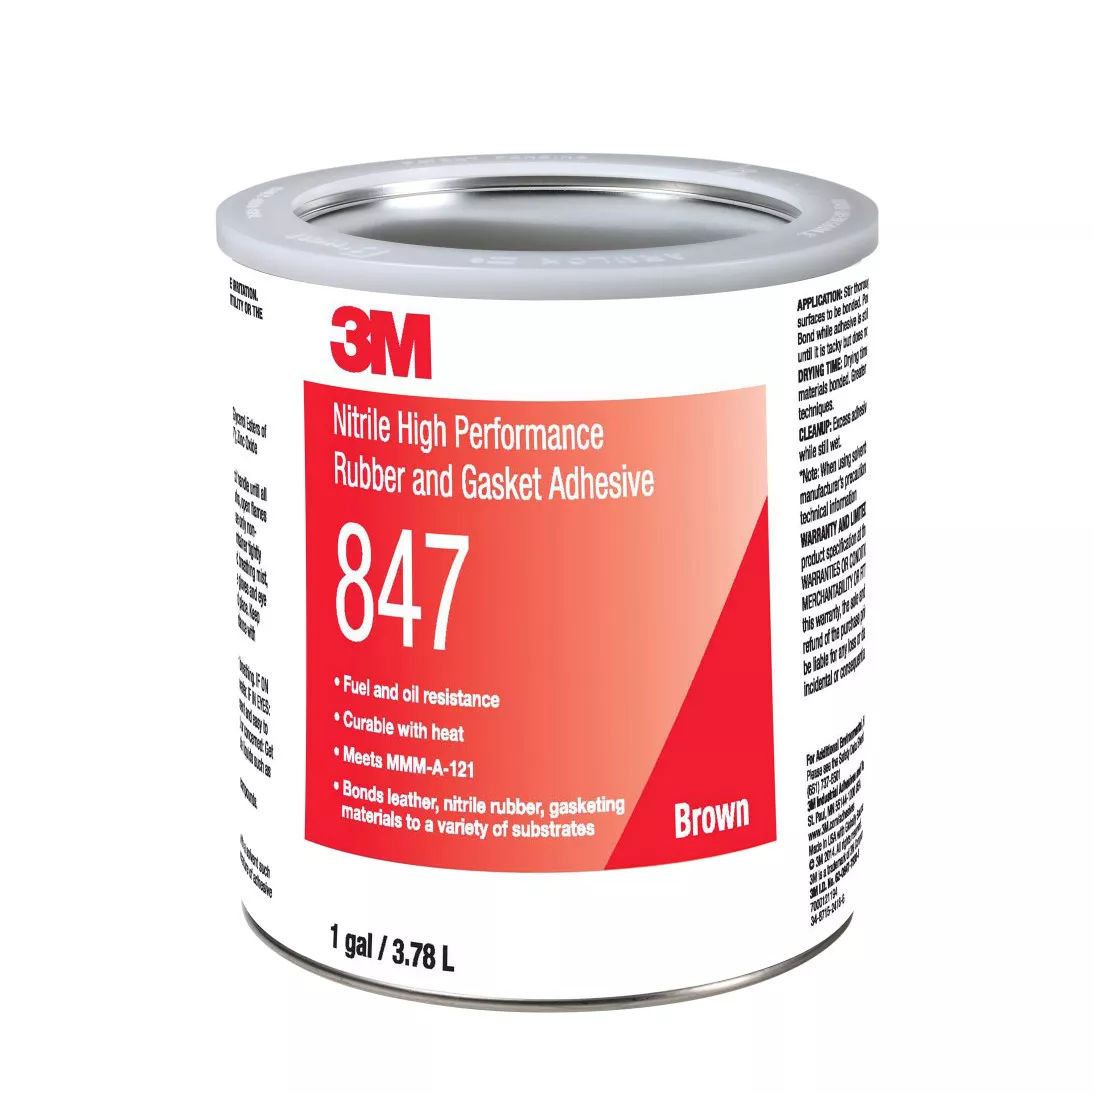 3M™ Nitrile High Performance Rubber and Gasket Adhesive 847, Brown, 1
Gallon Can, 4/case